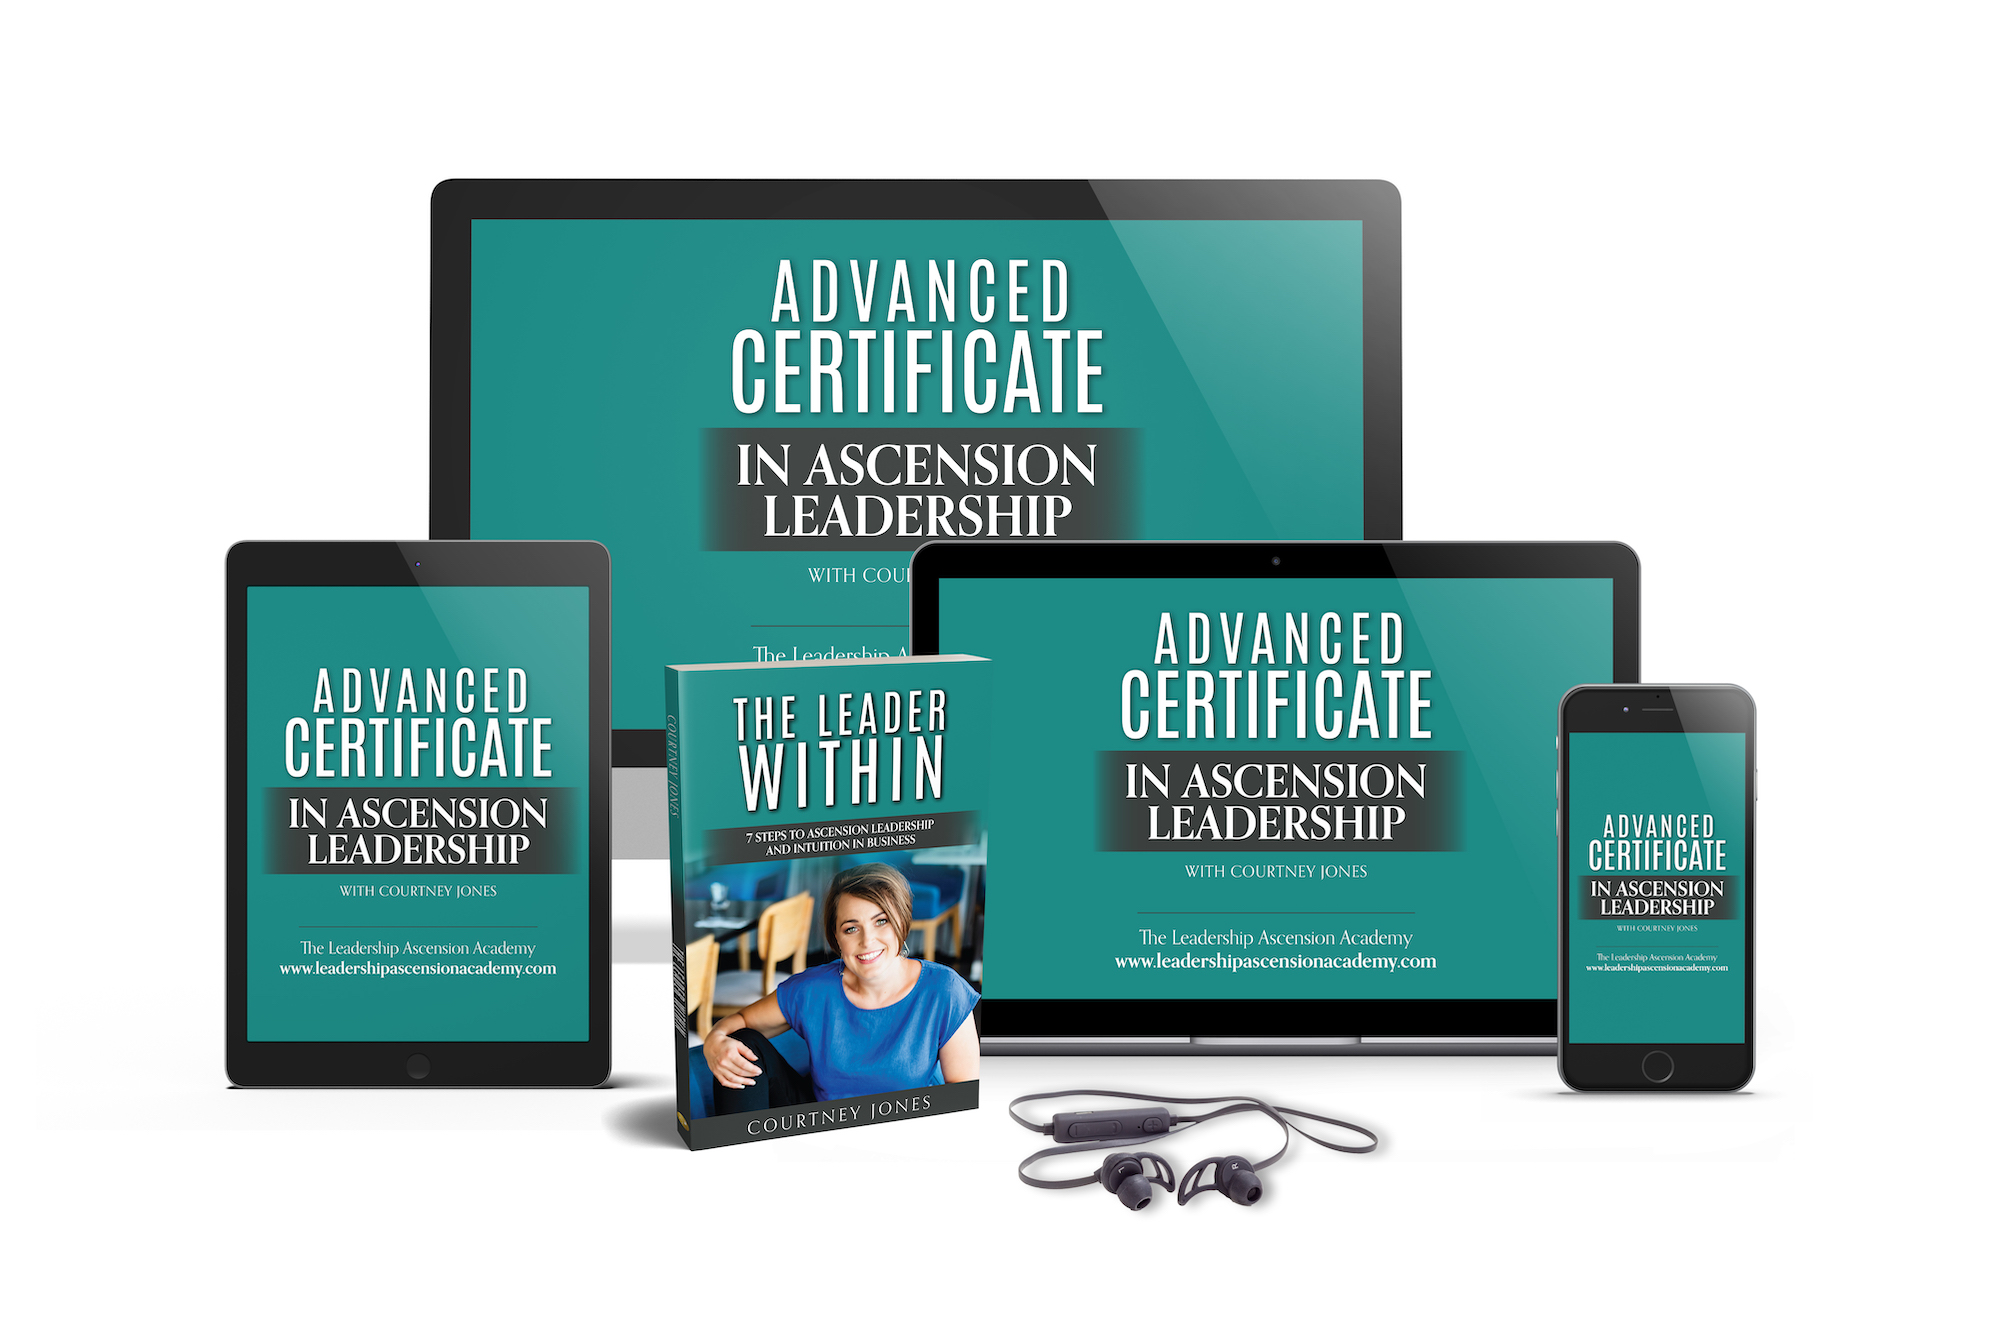 Advanced Certificate in Ascension Leadership